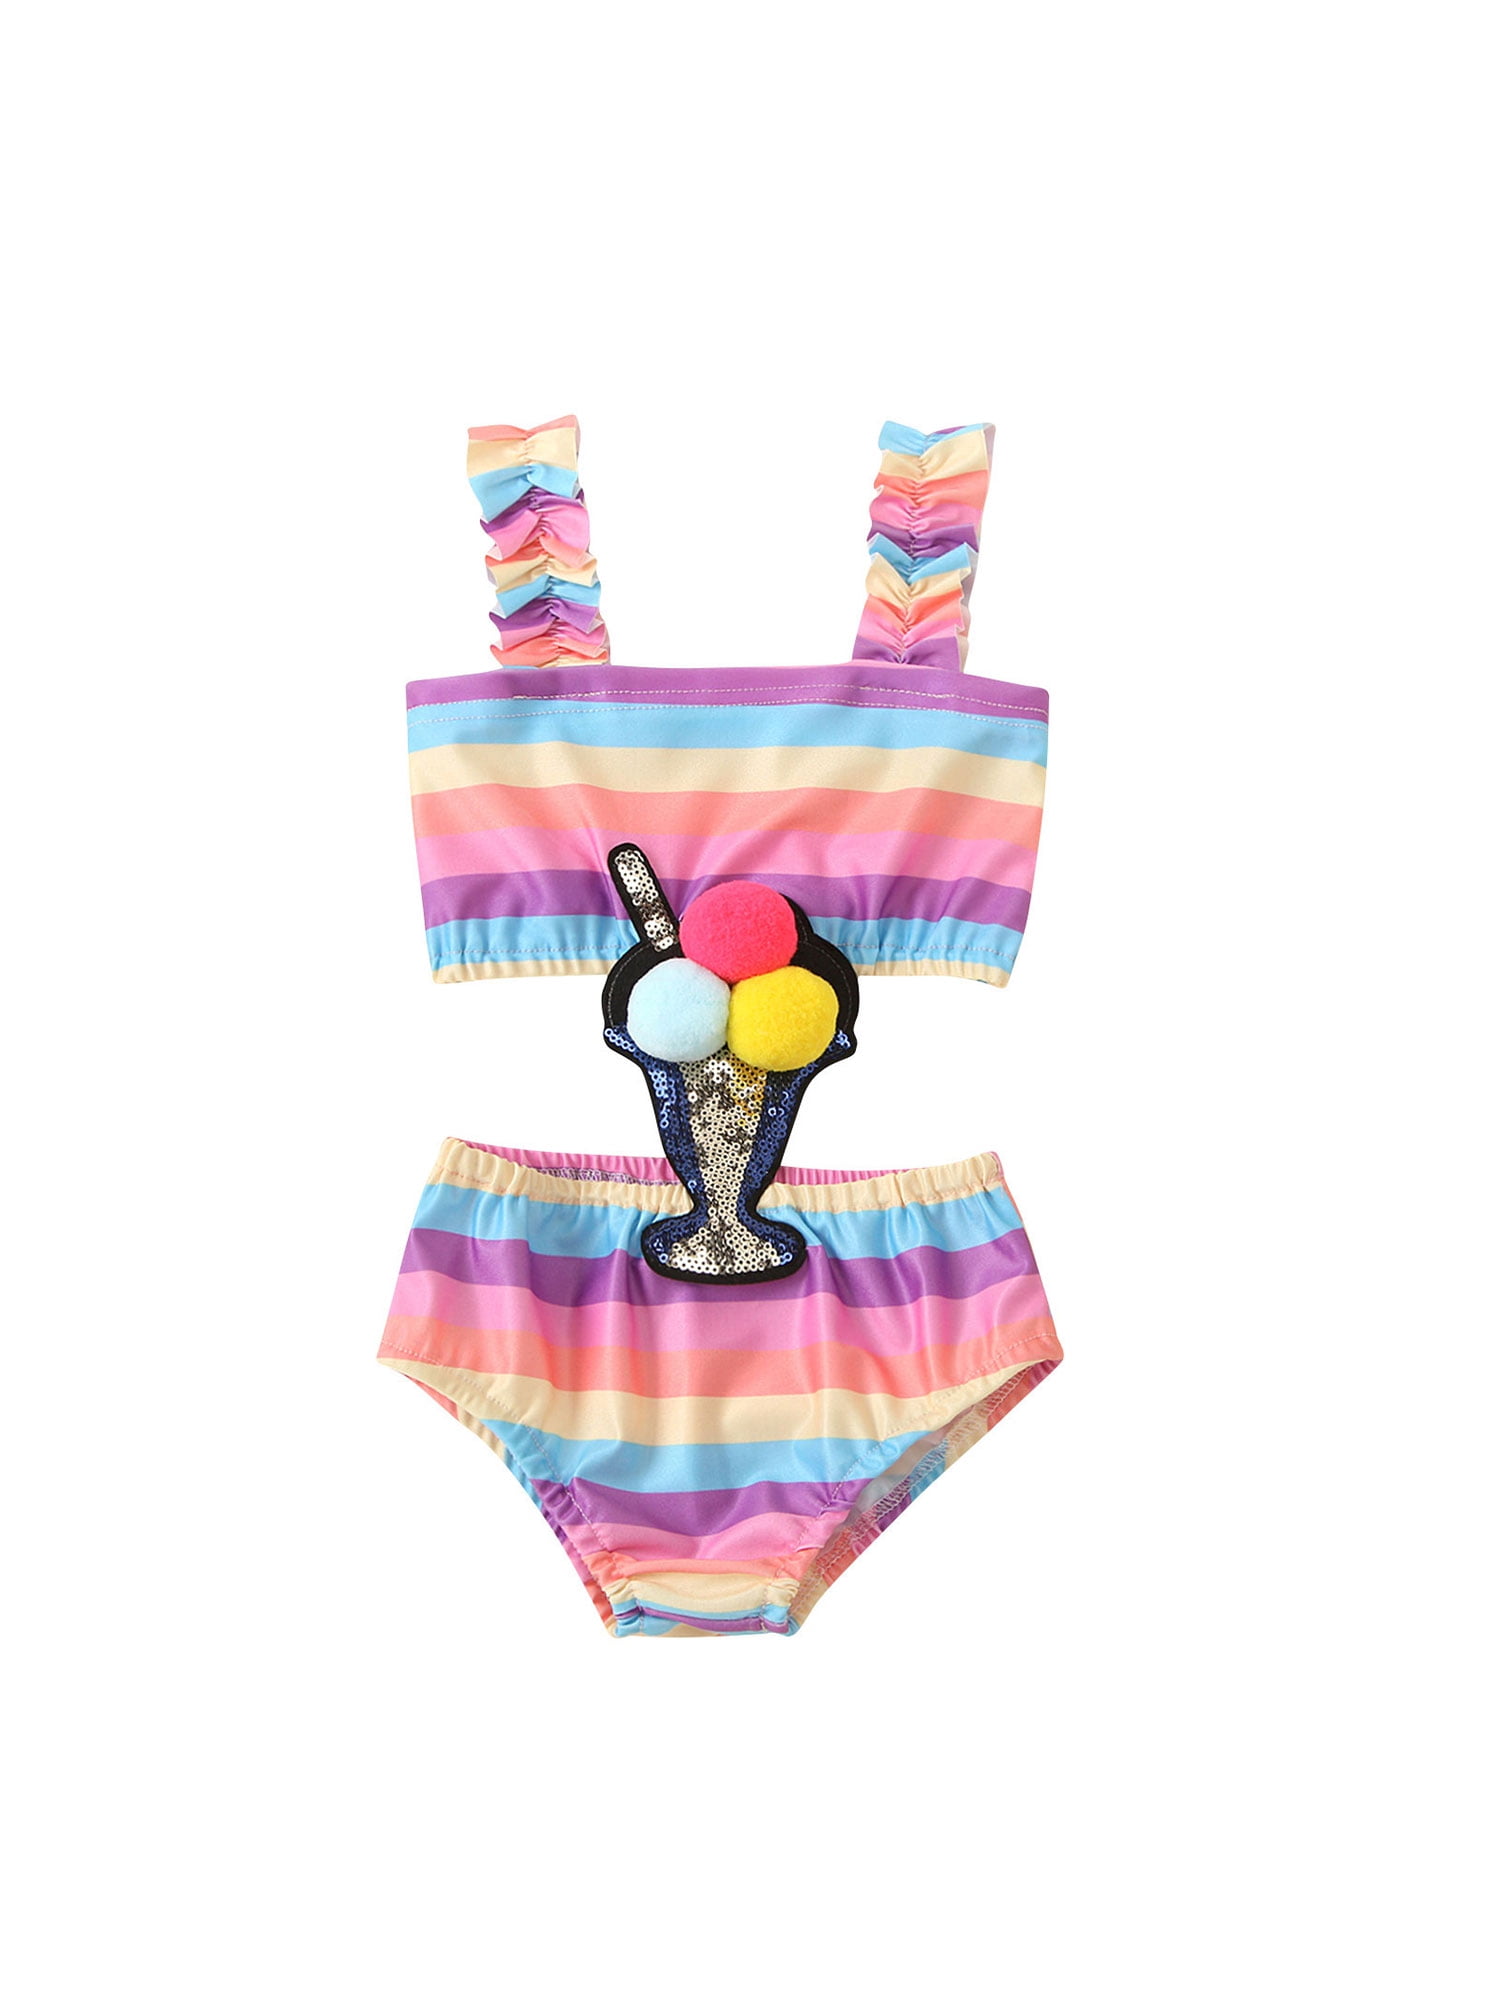 Baby Girls Pink Swimming Costume with Fairy detail 